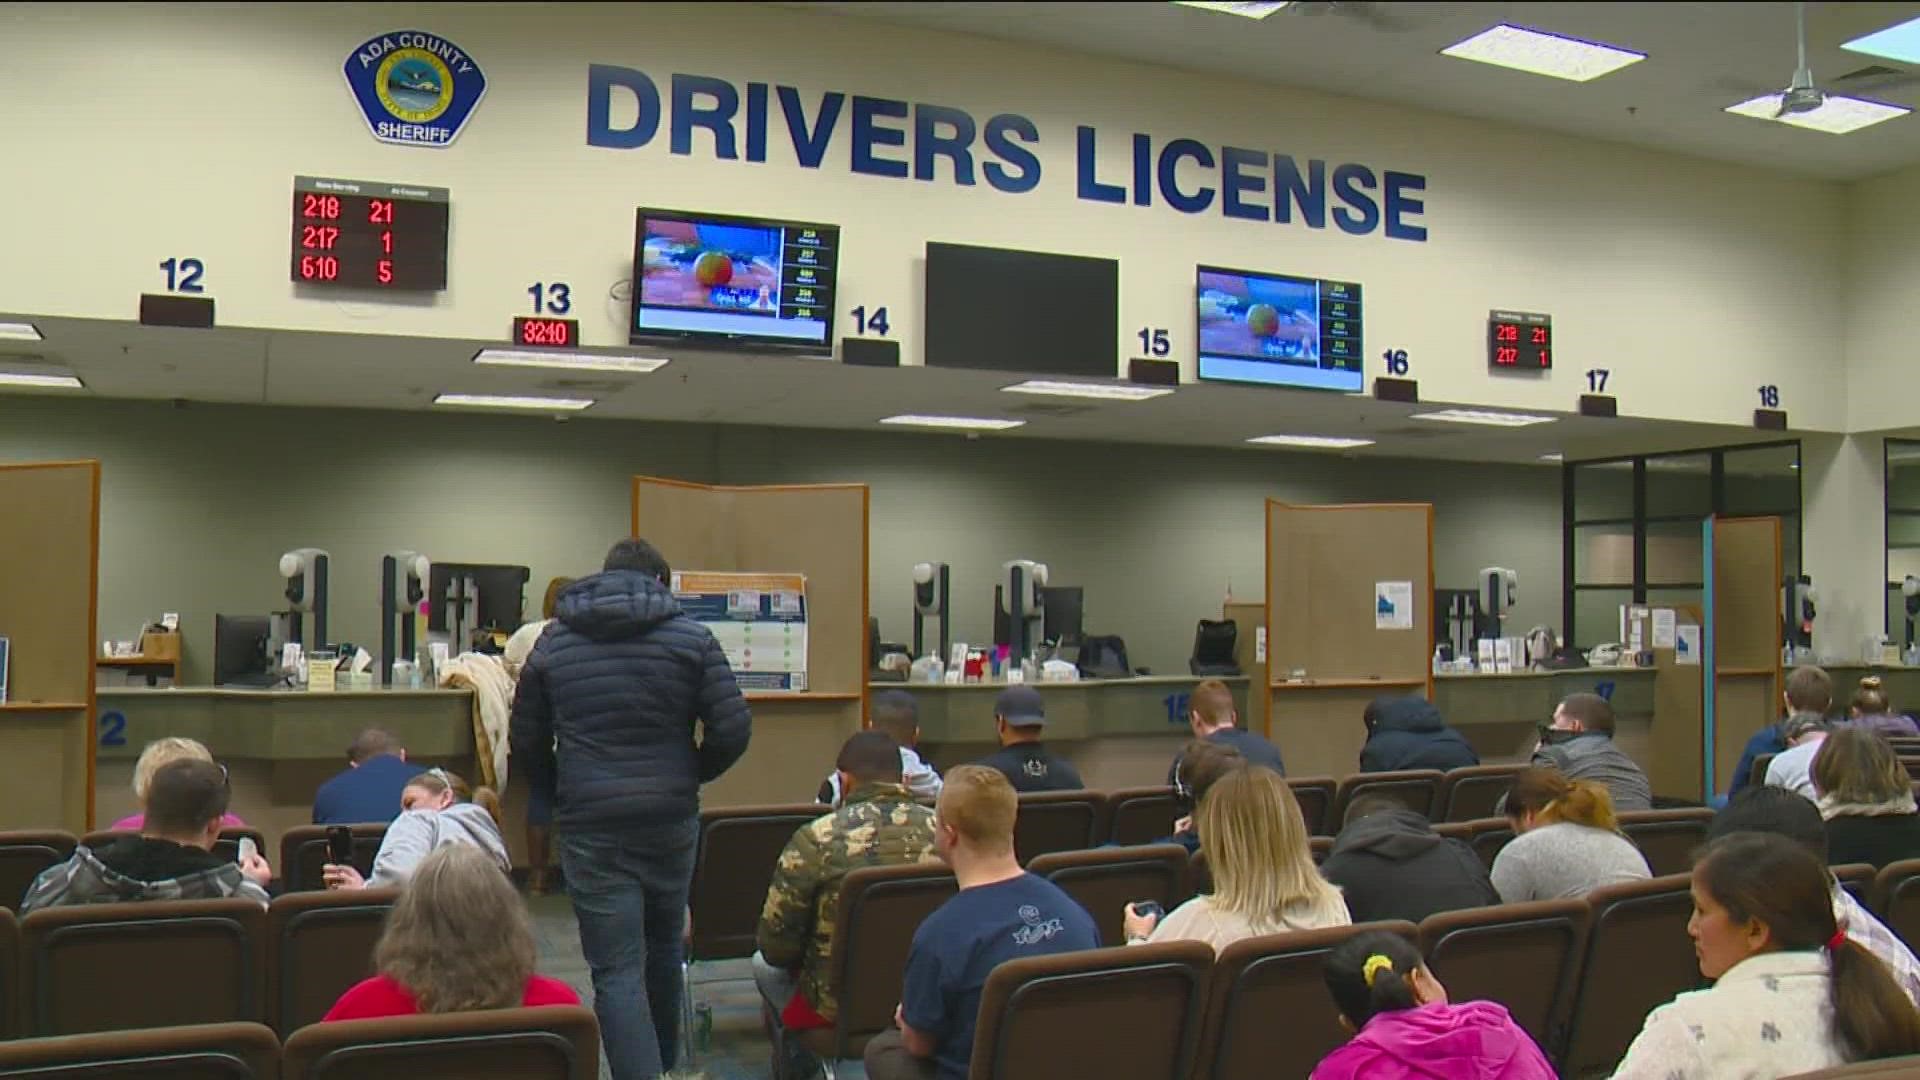 The legislation would allow those to obtain a restricted driver's license in the state of Idaho regardless of immigration status.